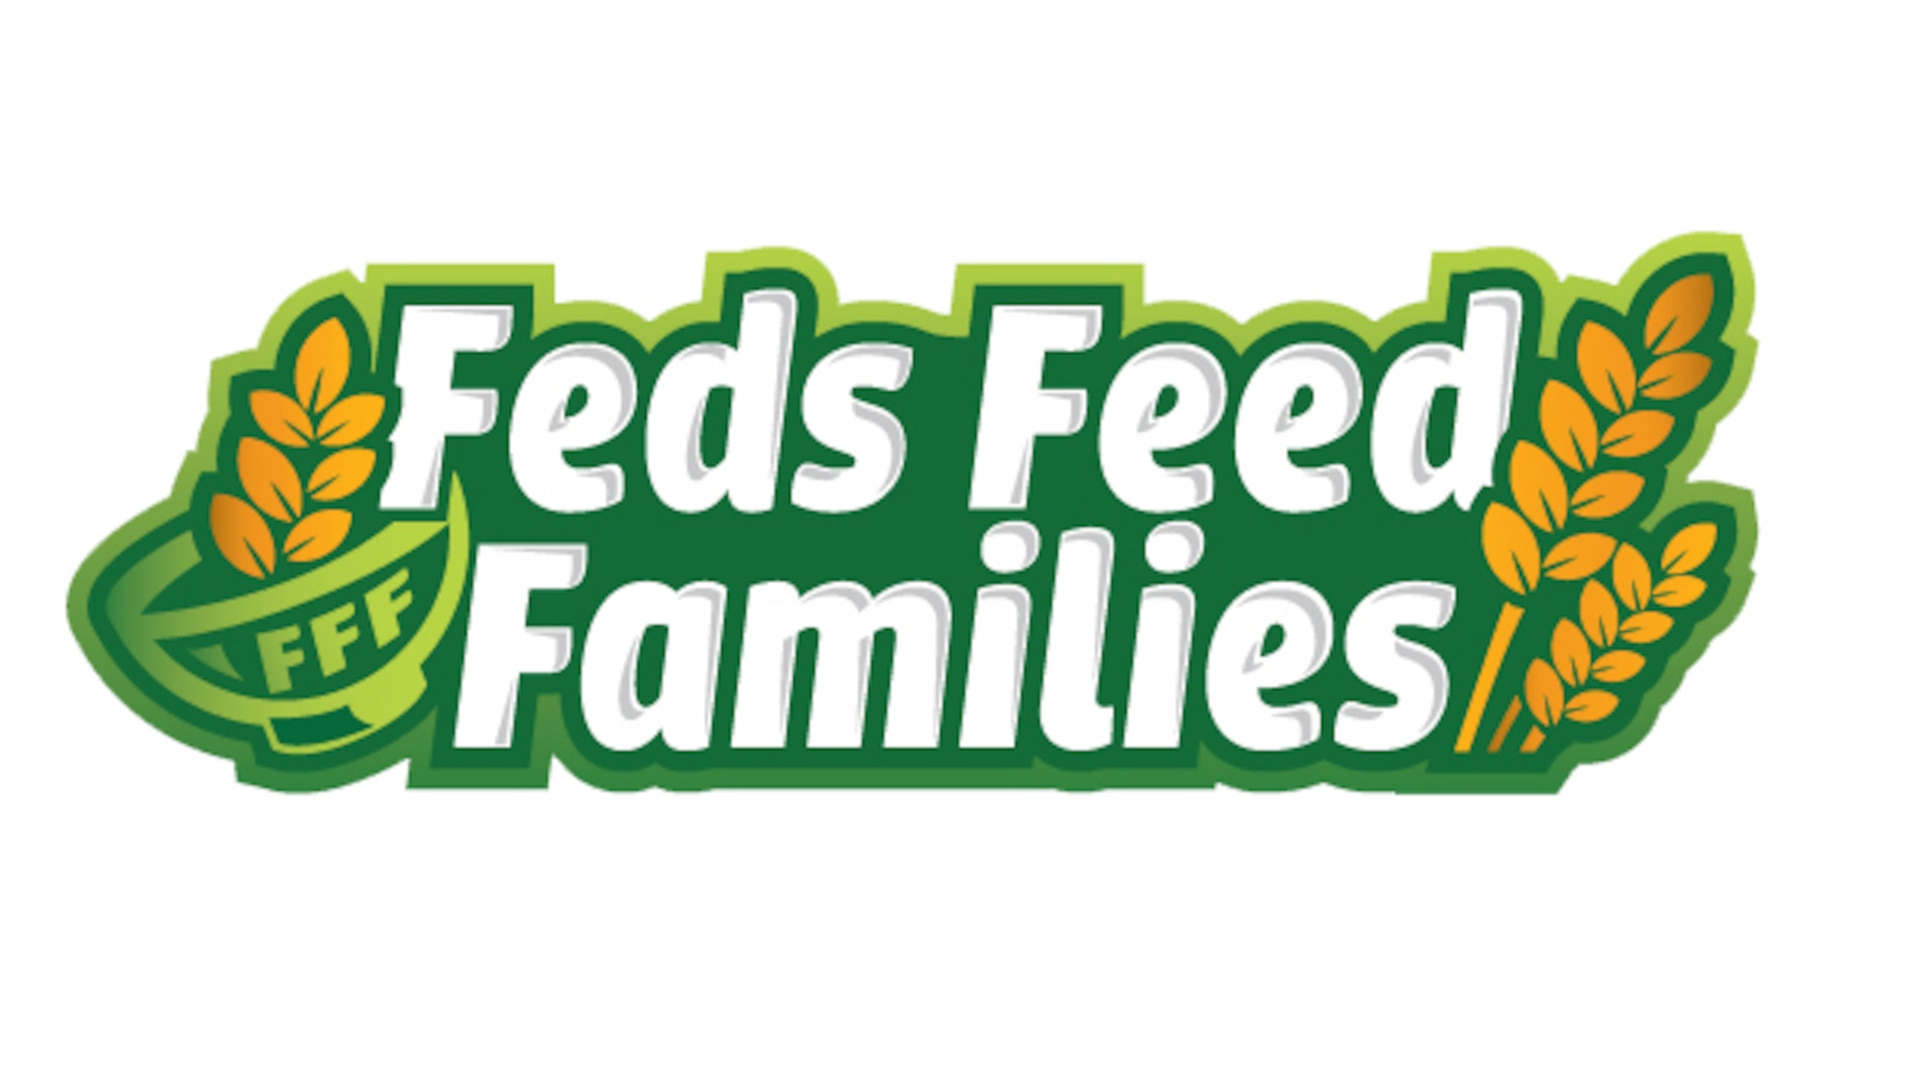 Feds Feed Families graphic